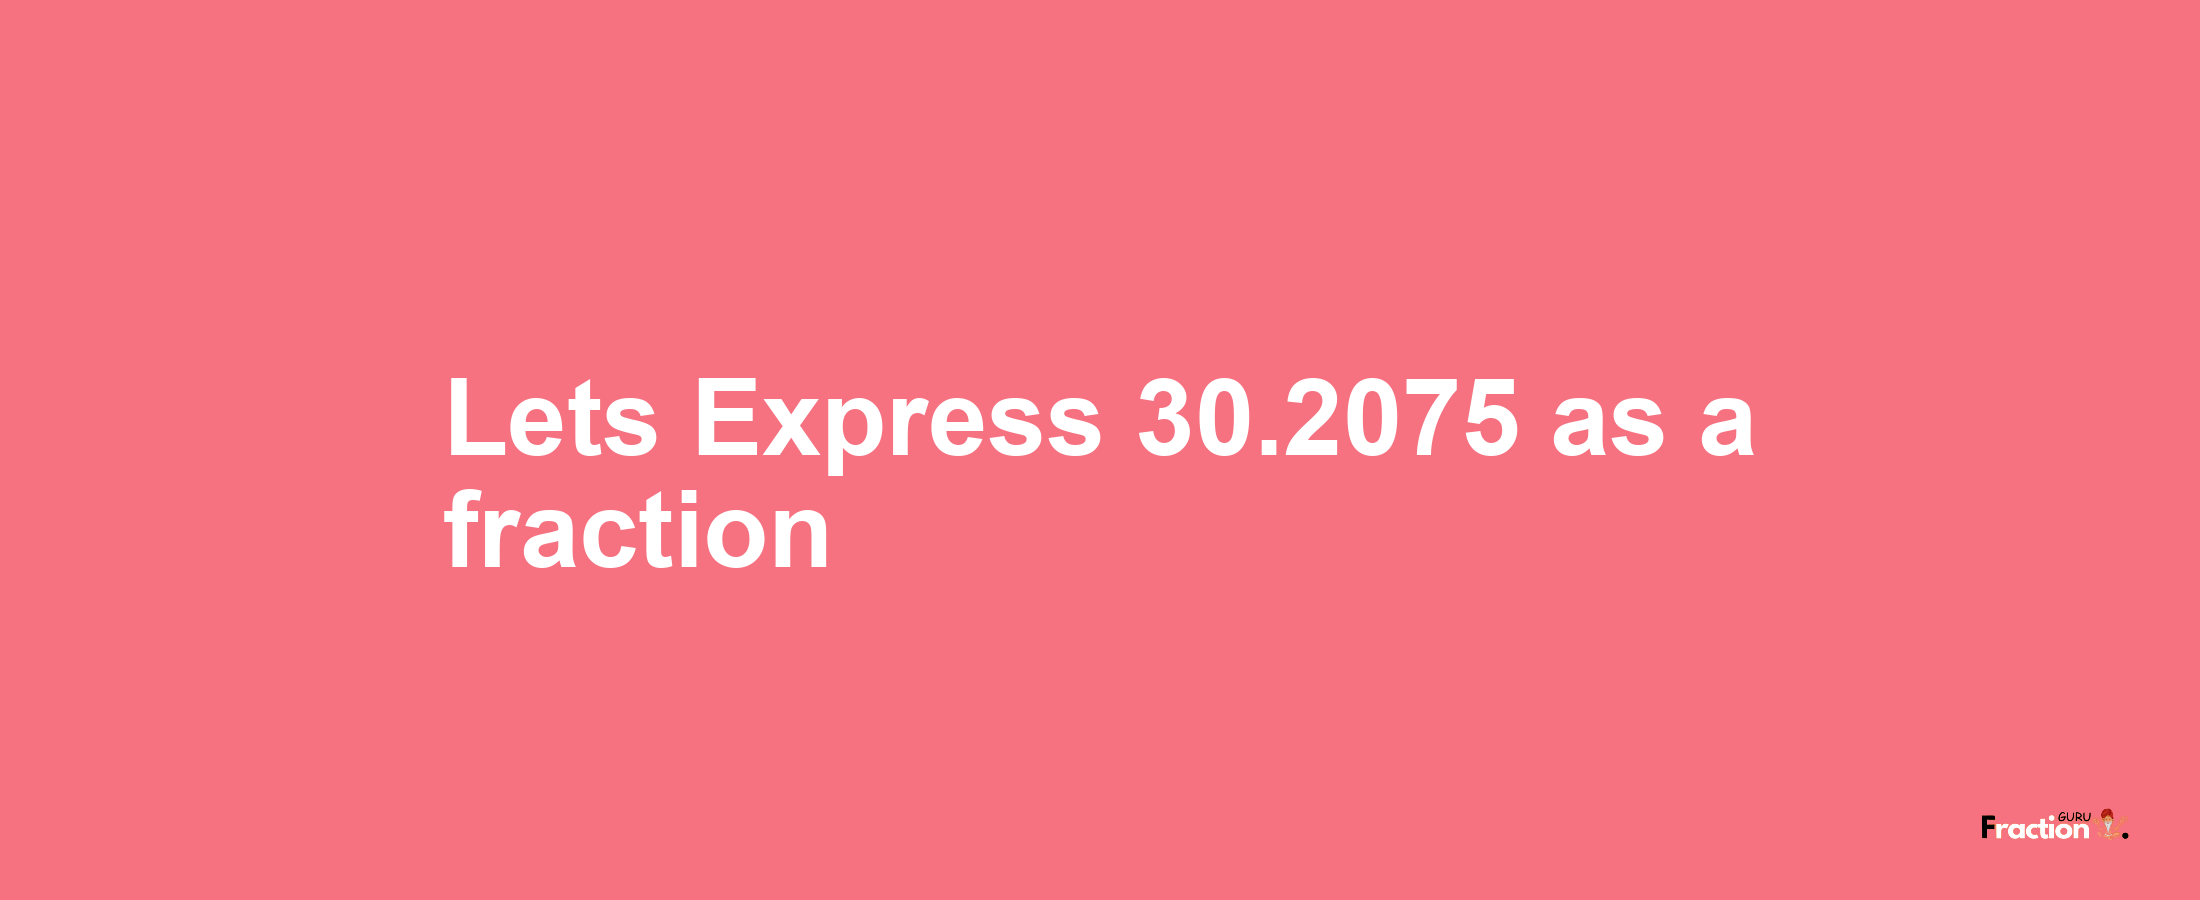 Lets Express 30.2075 as afraction